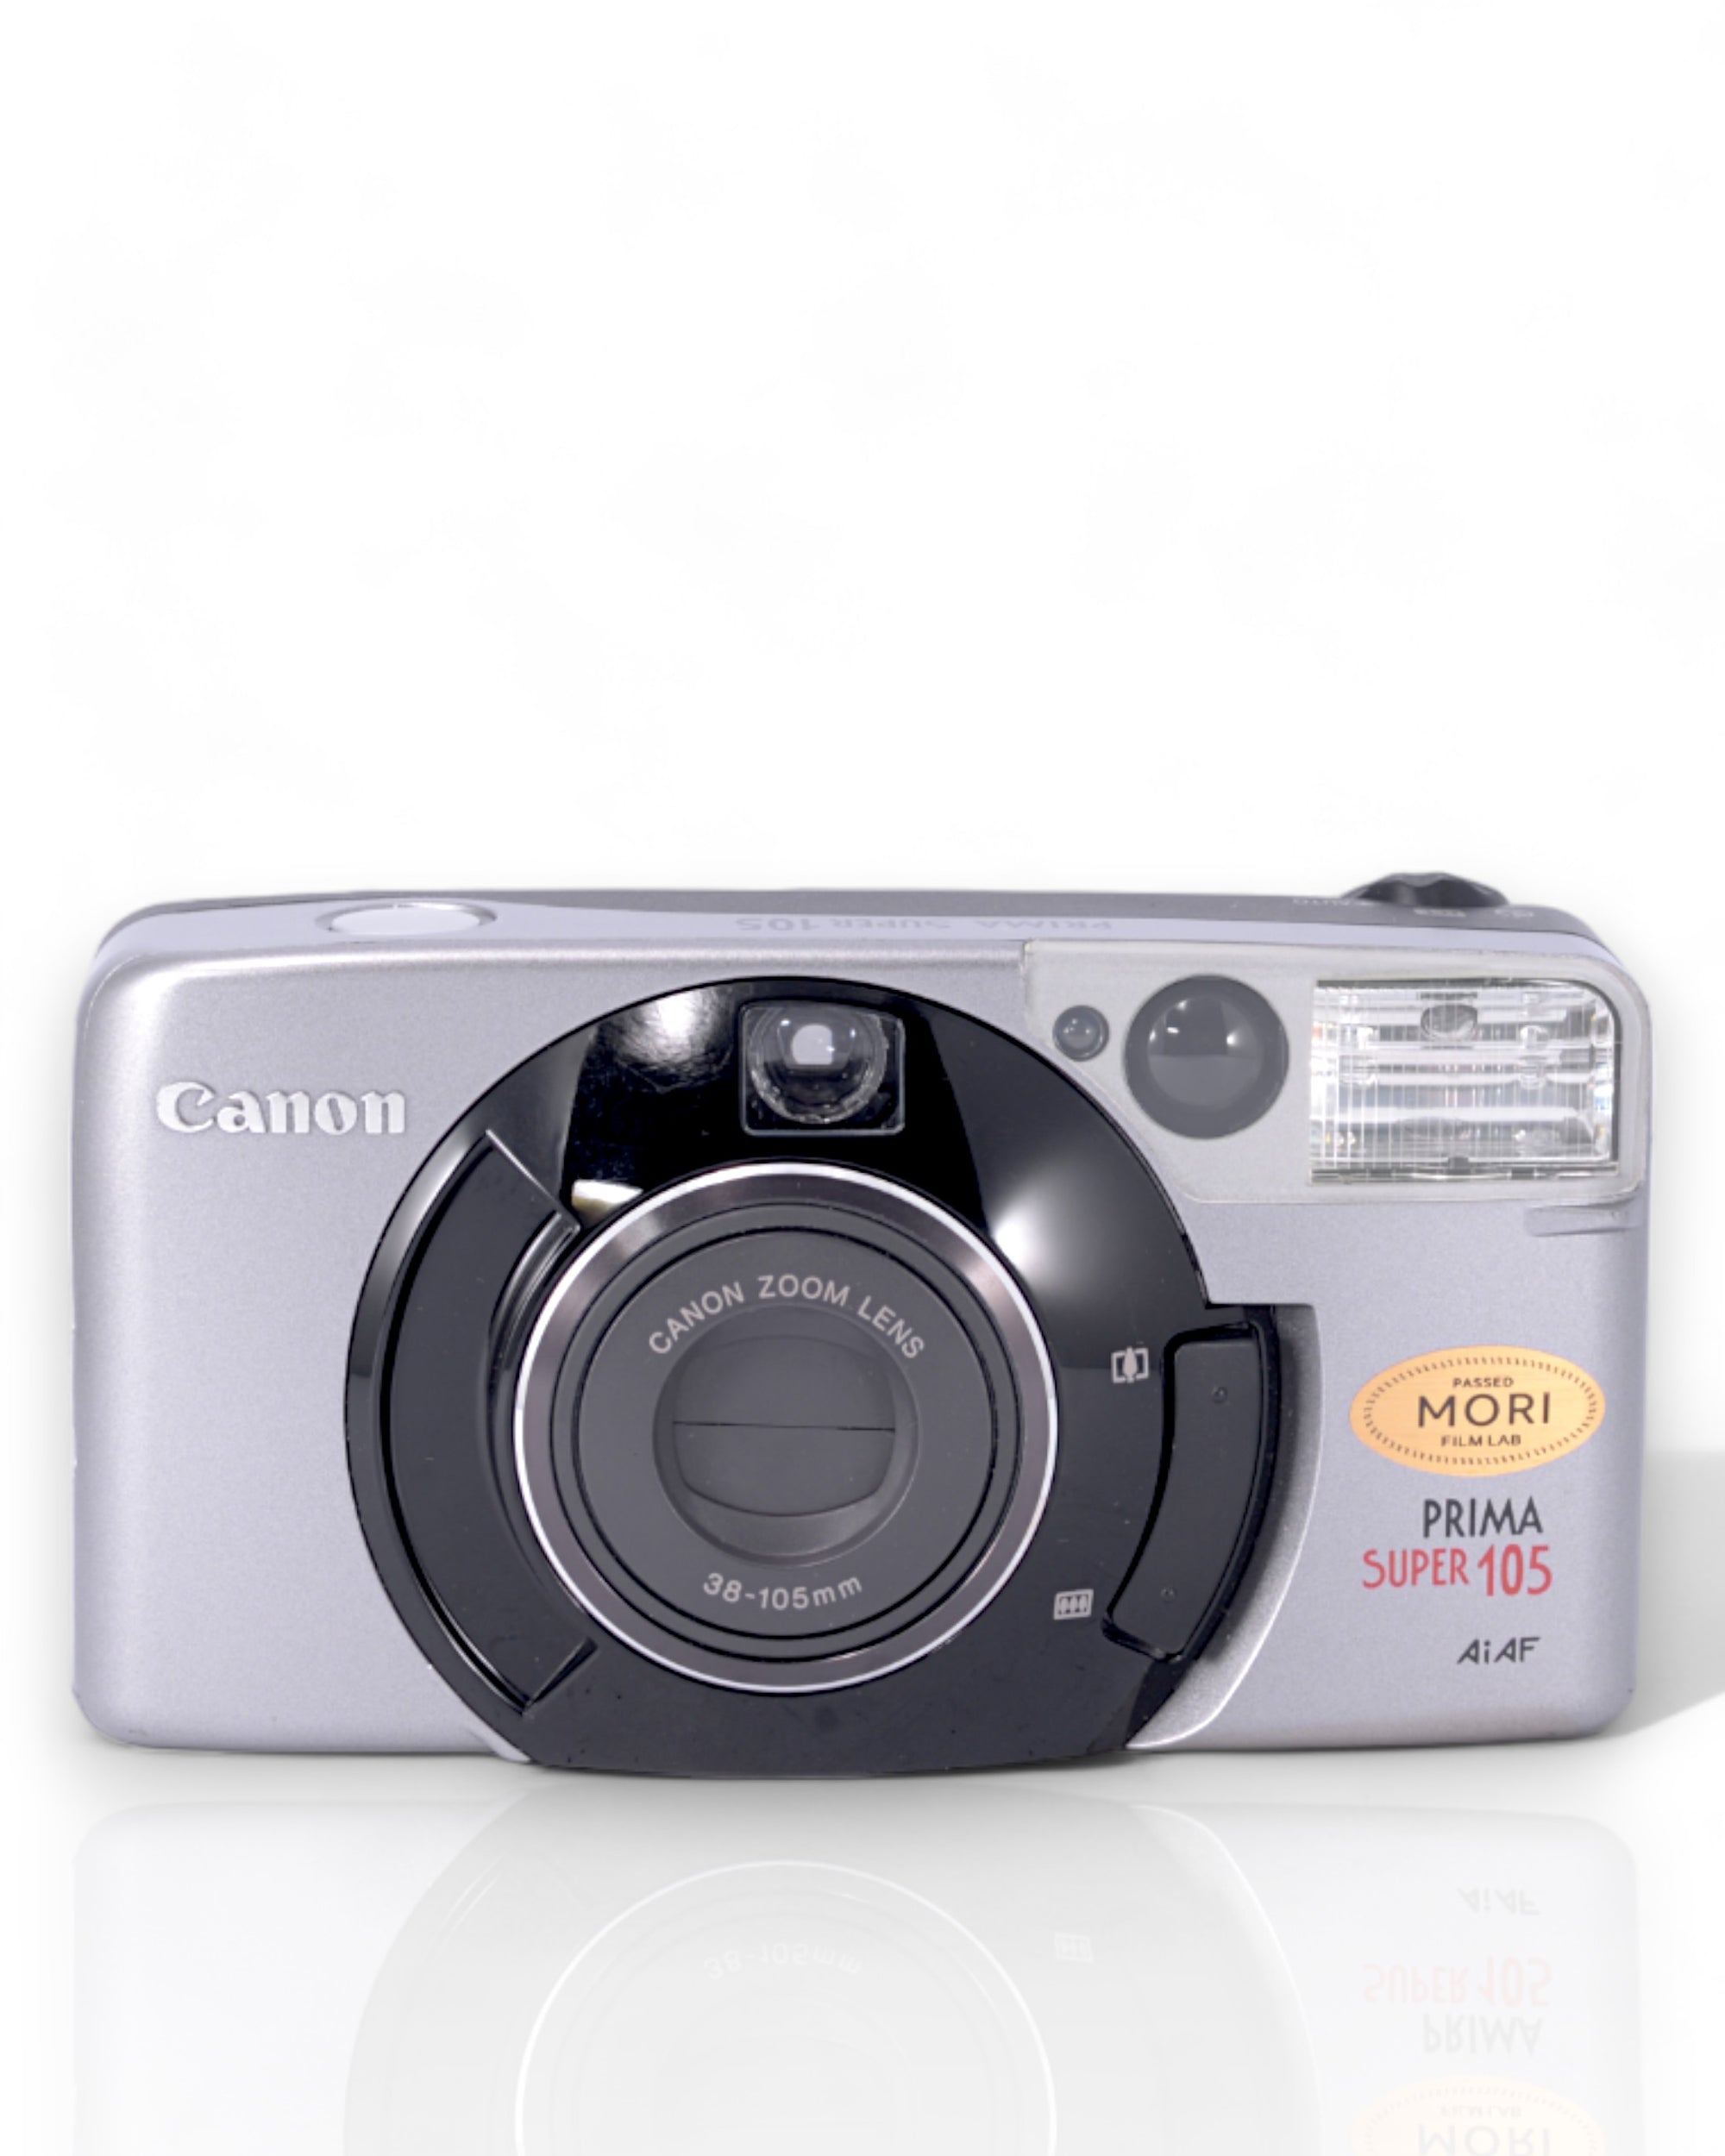 Canon Prima Super 105 35mm Point & Shoot Film Camera with 38-105mm Lens